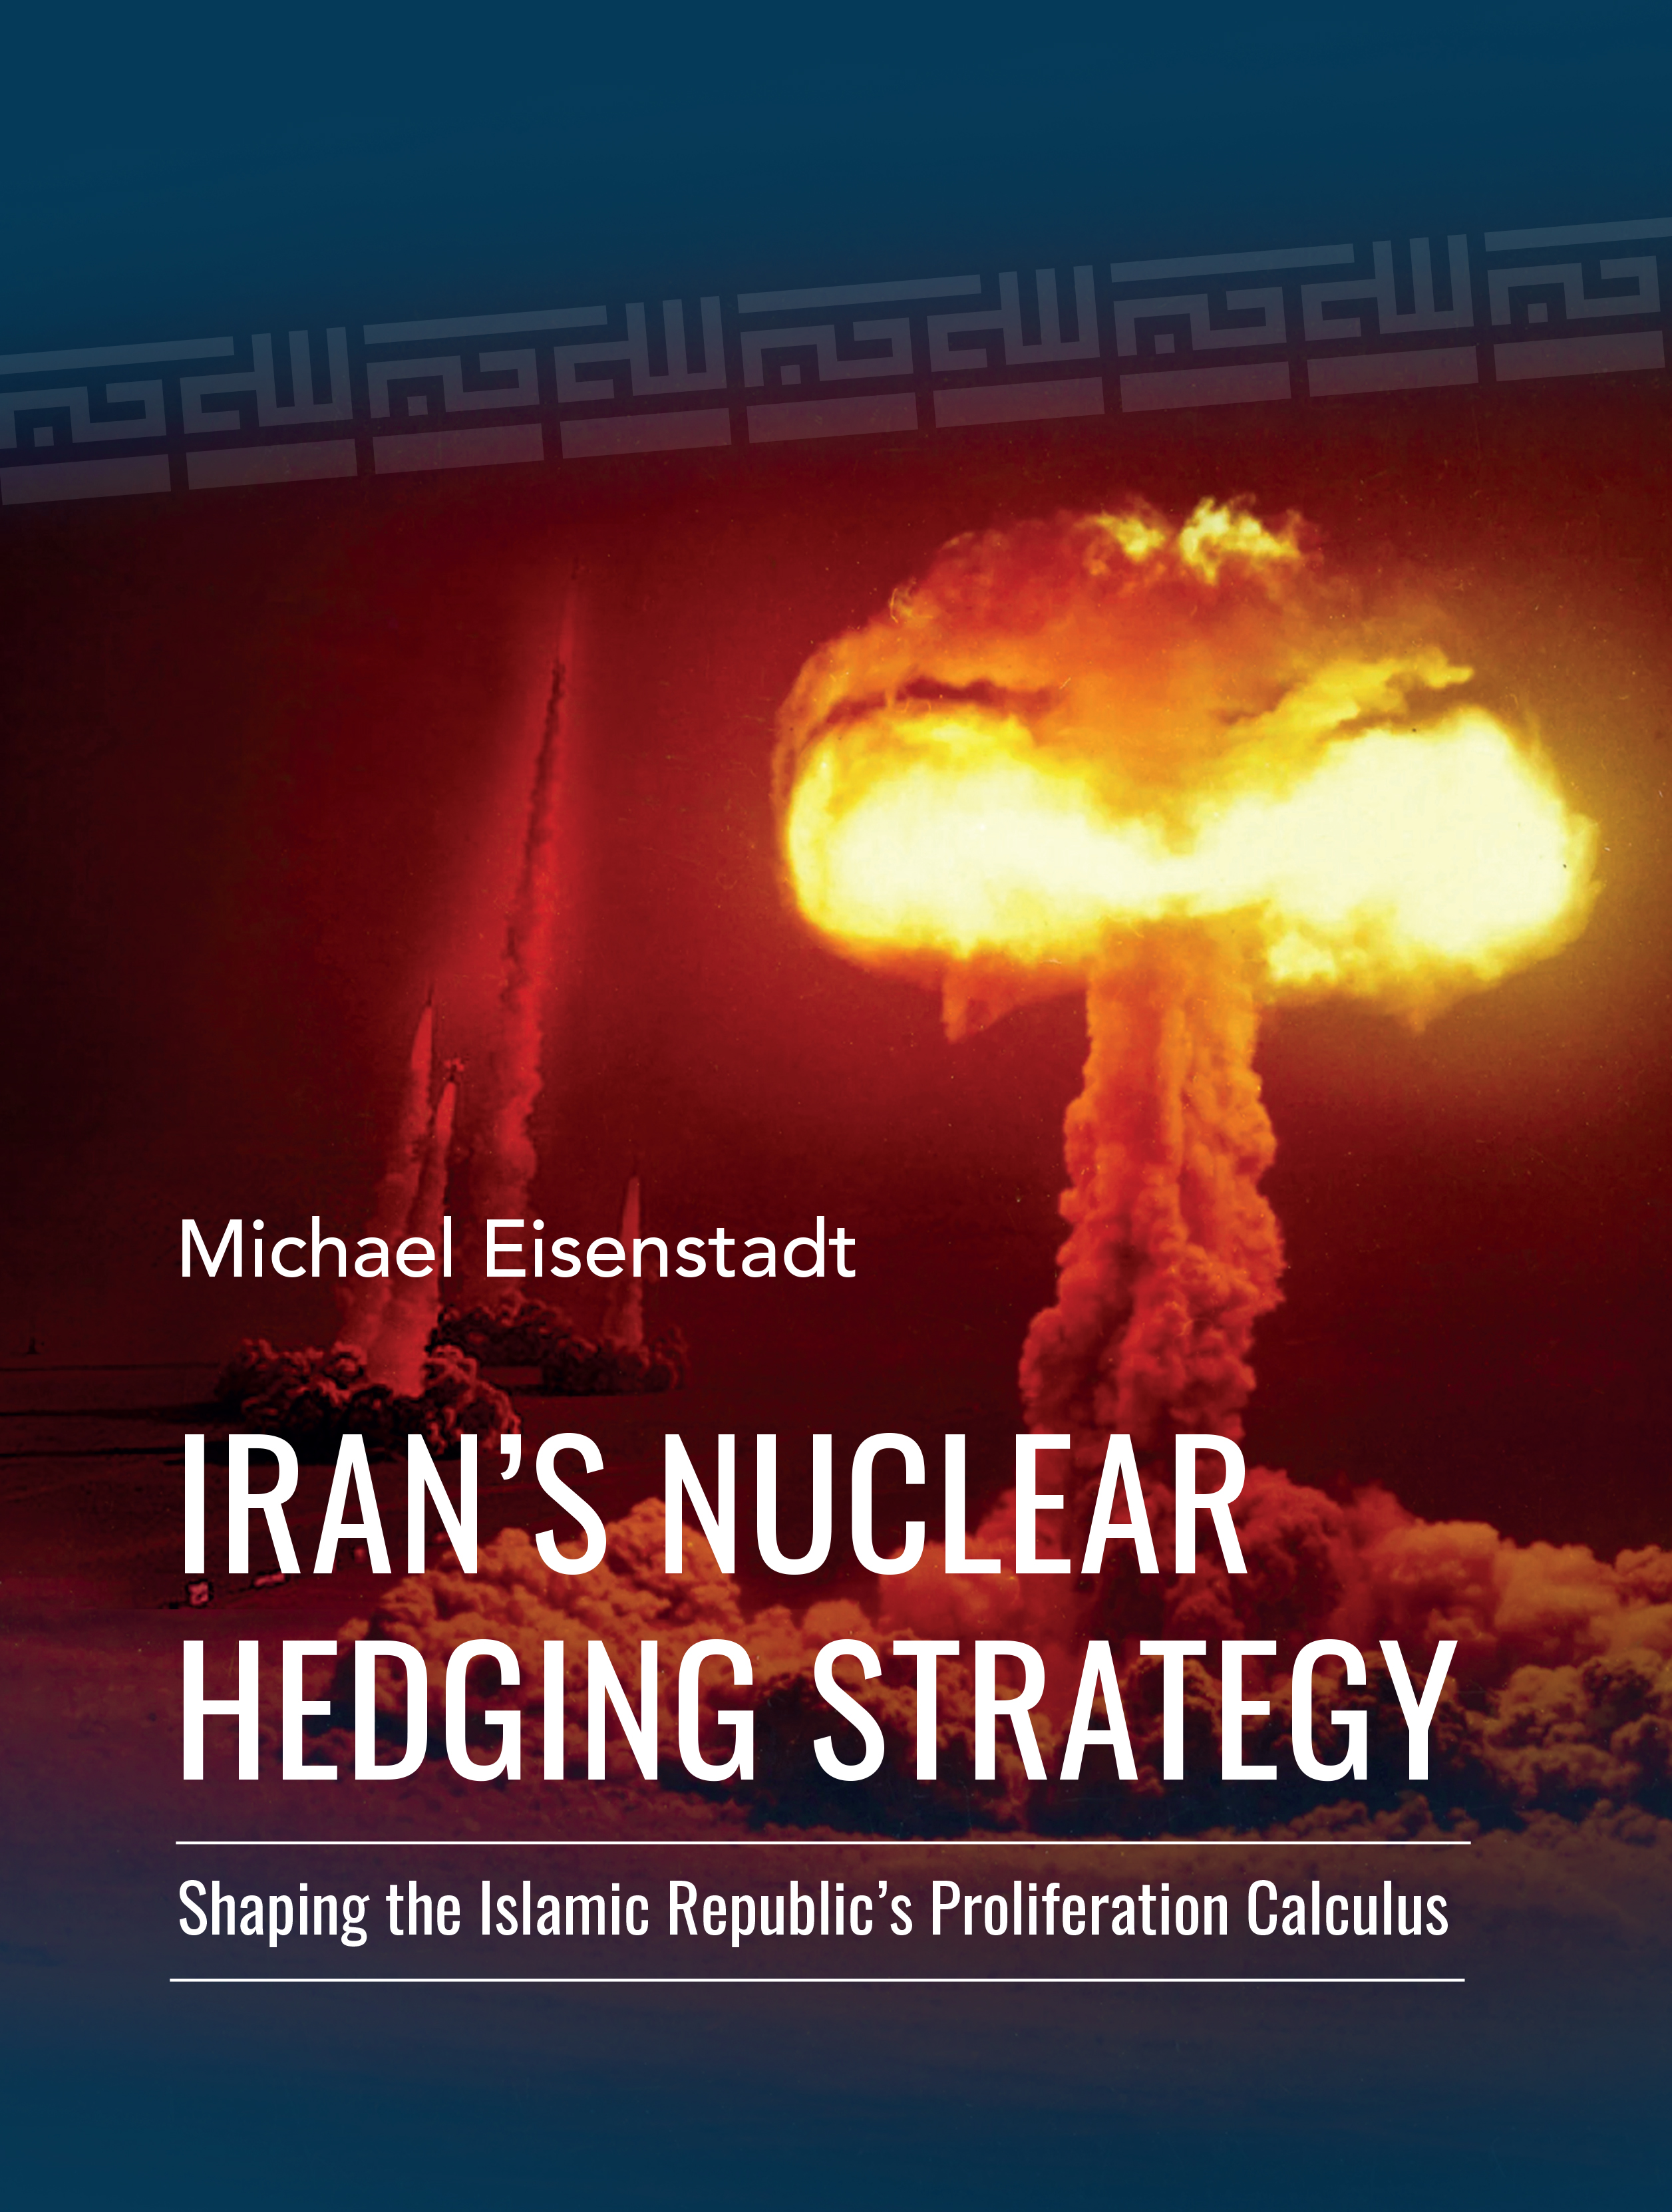 Iran’s Nuclear Hedging Strategy: Shaping the Islamic Republic’s Proliferation Calculus